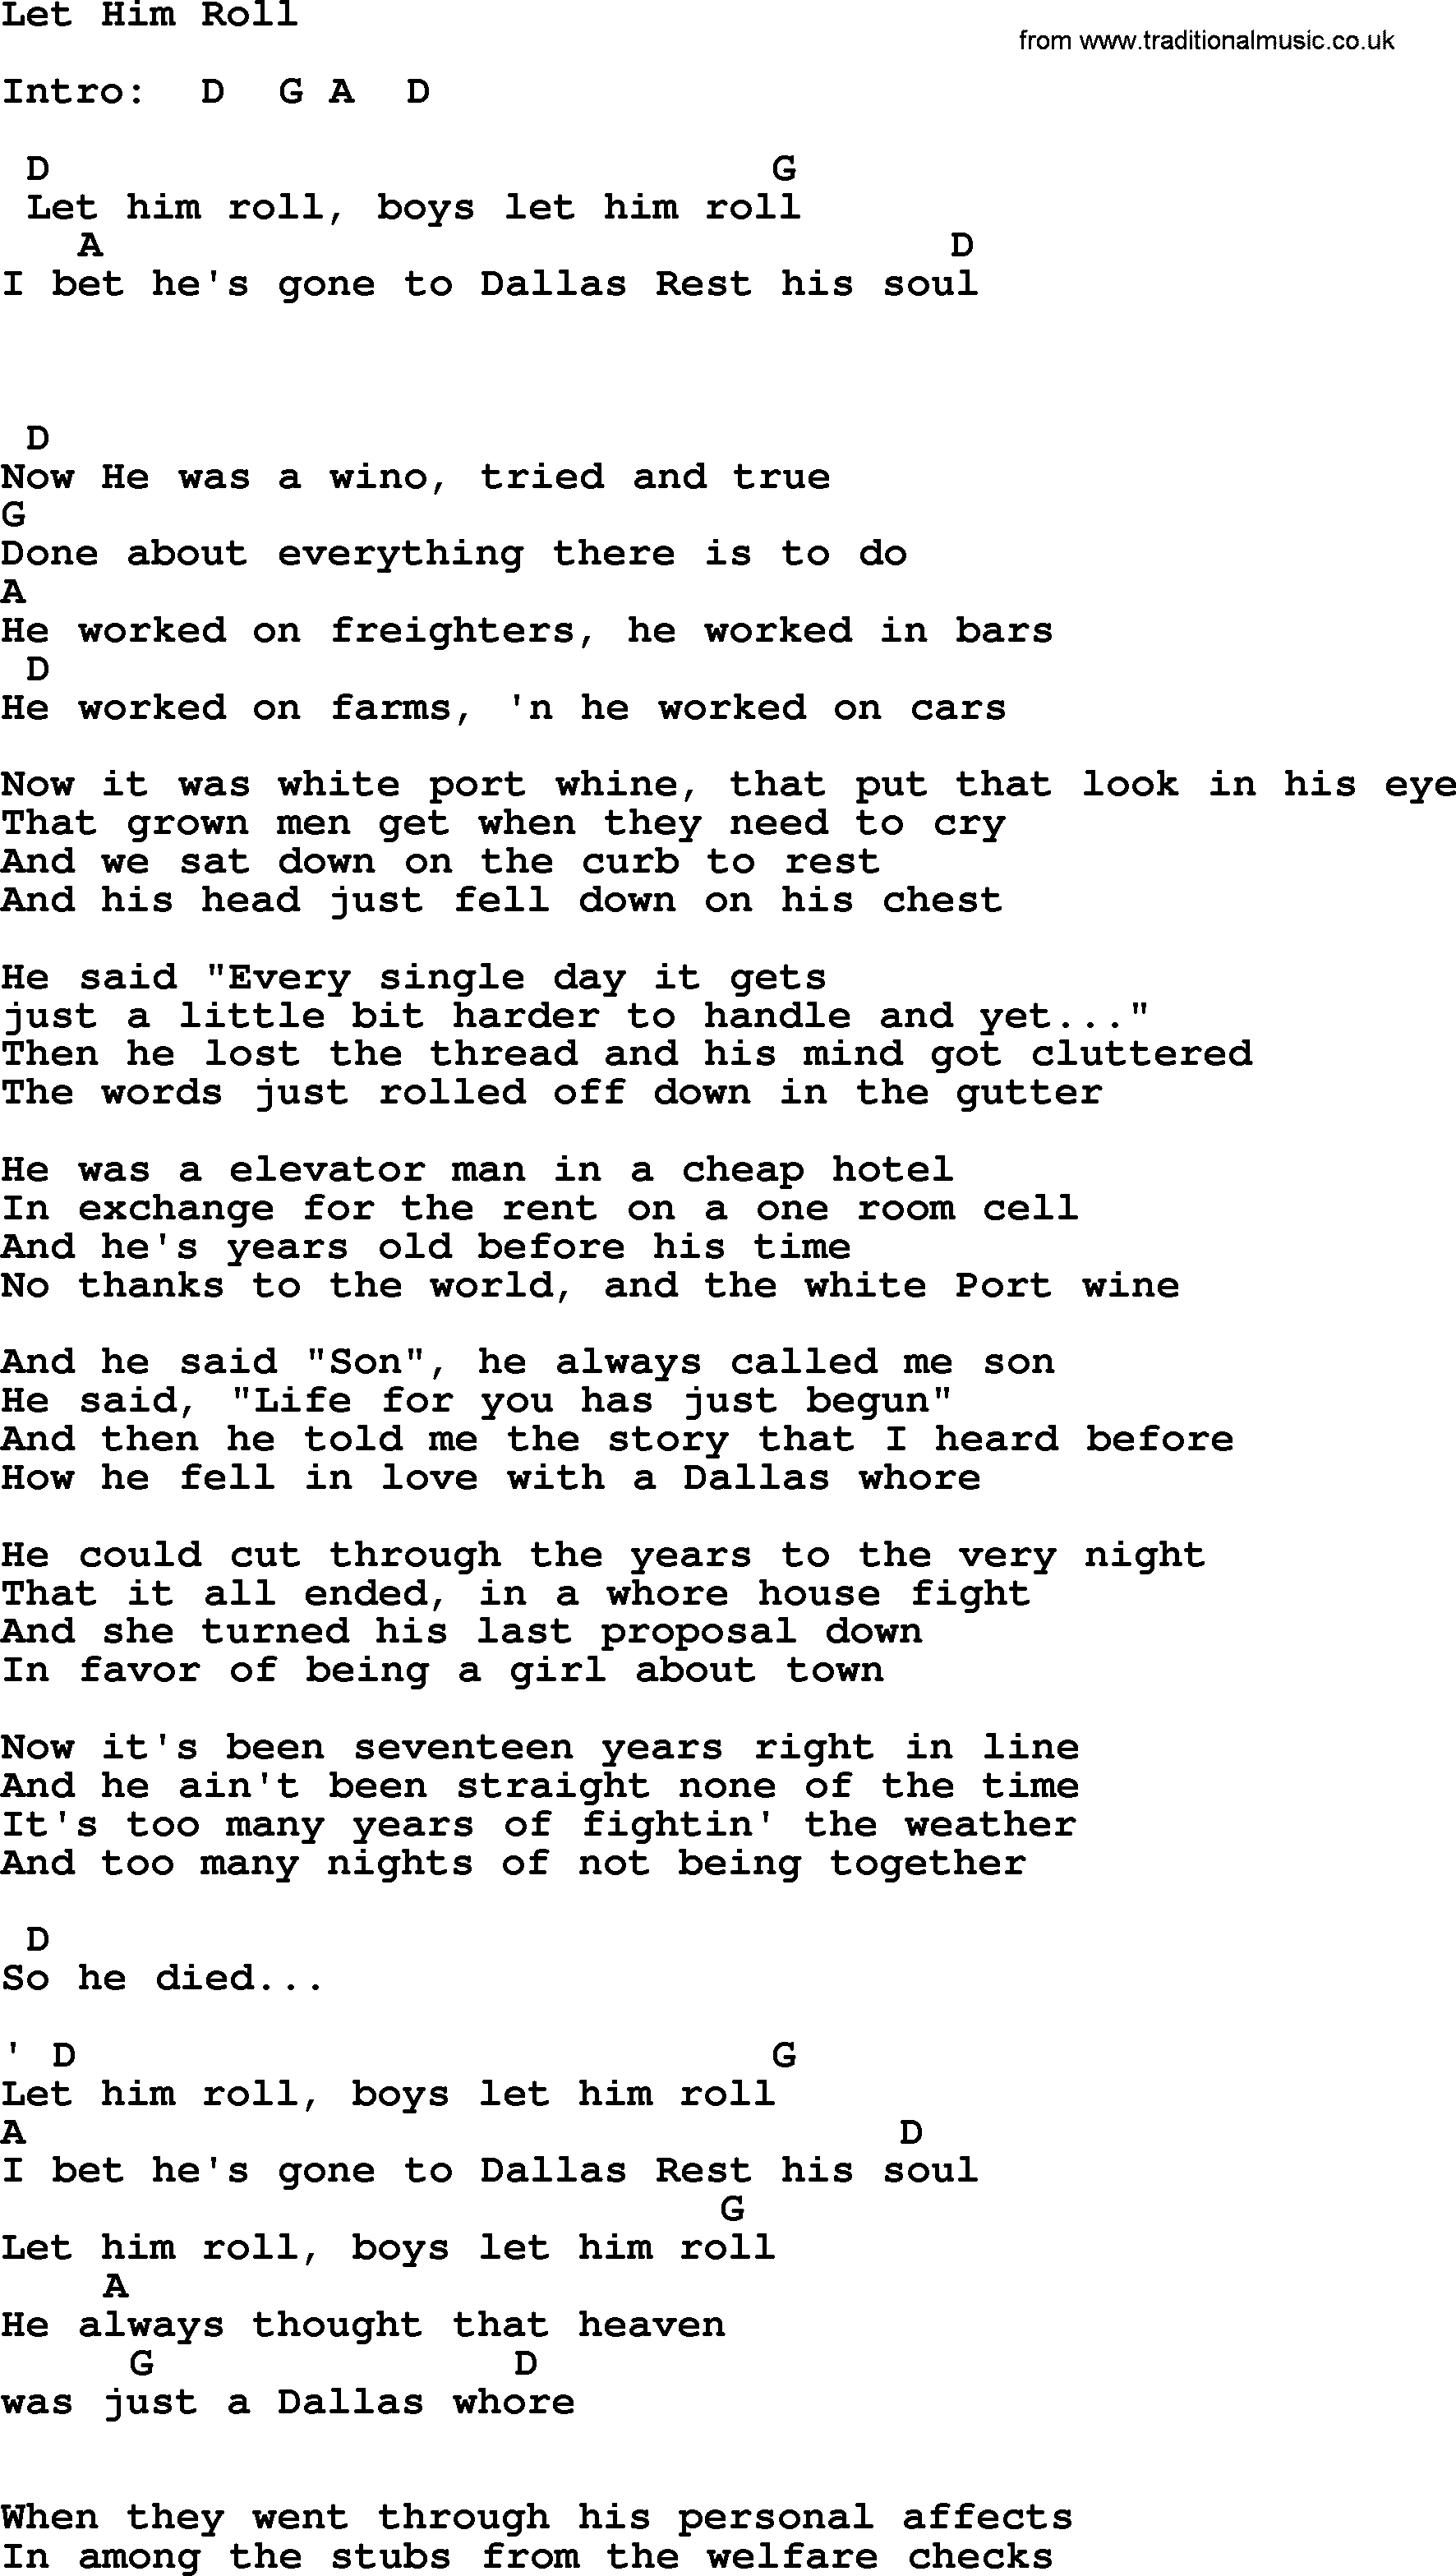 Johnny Cash song Let Him Roll, lyrics and chords